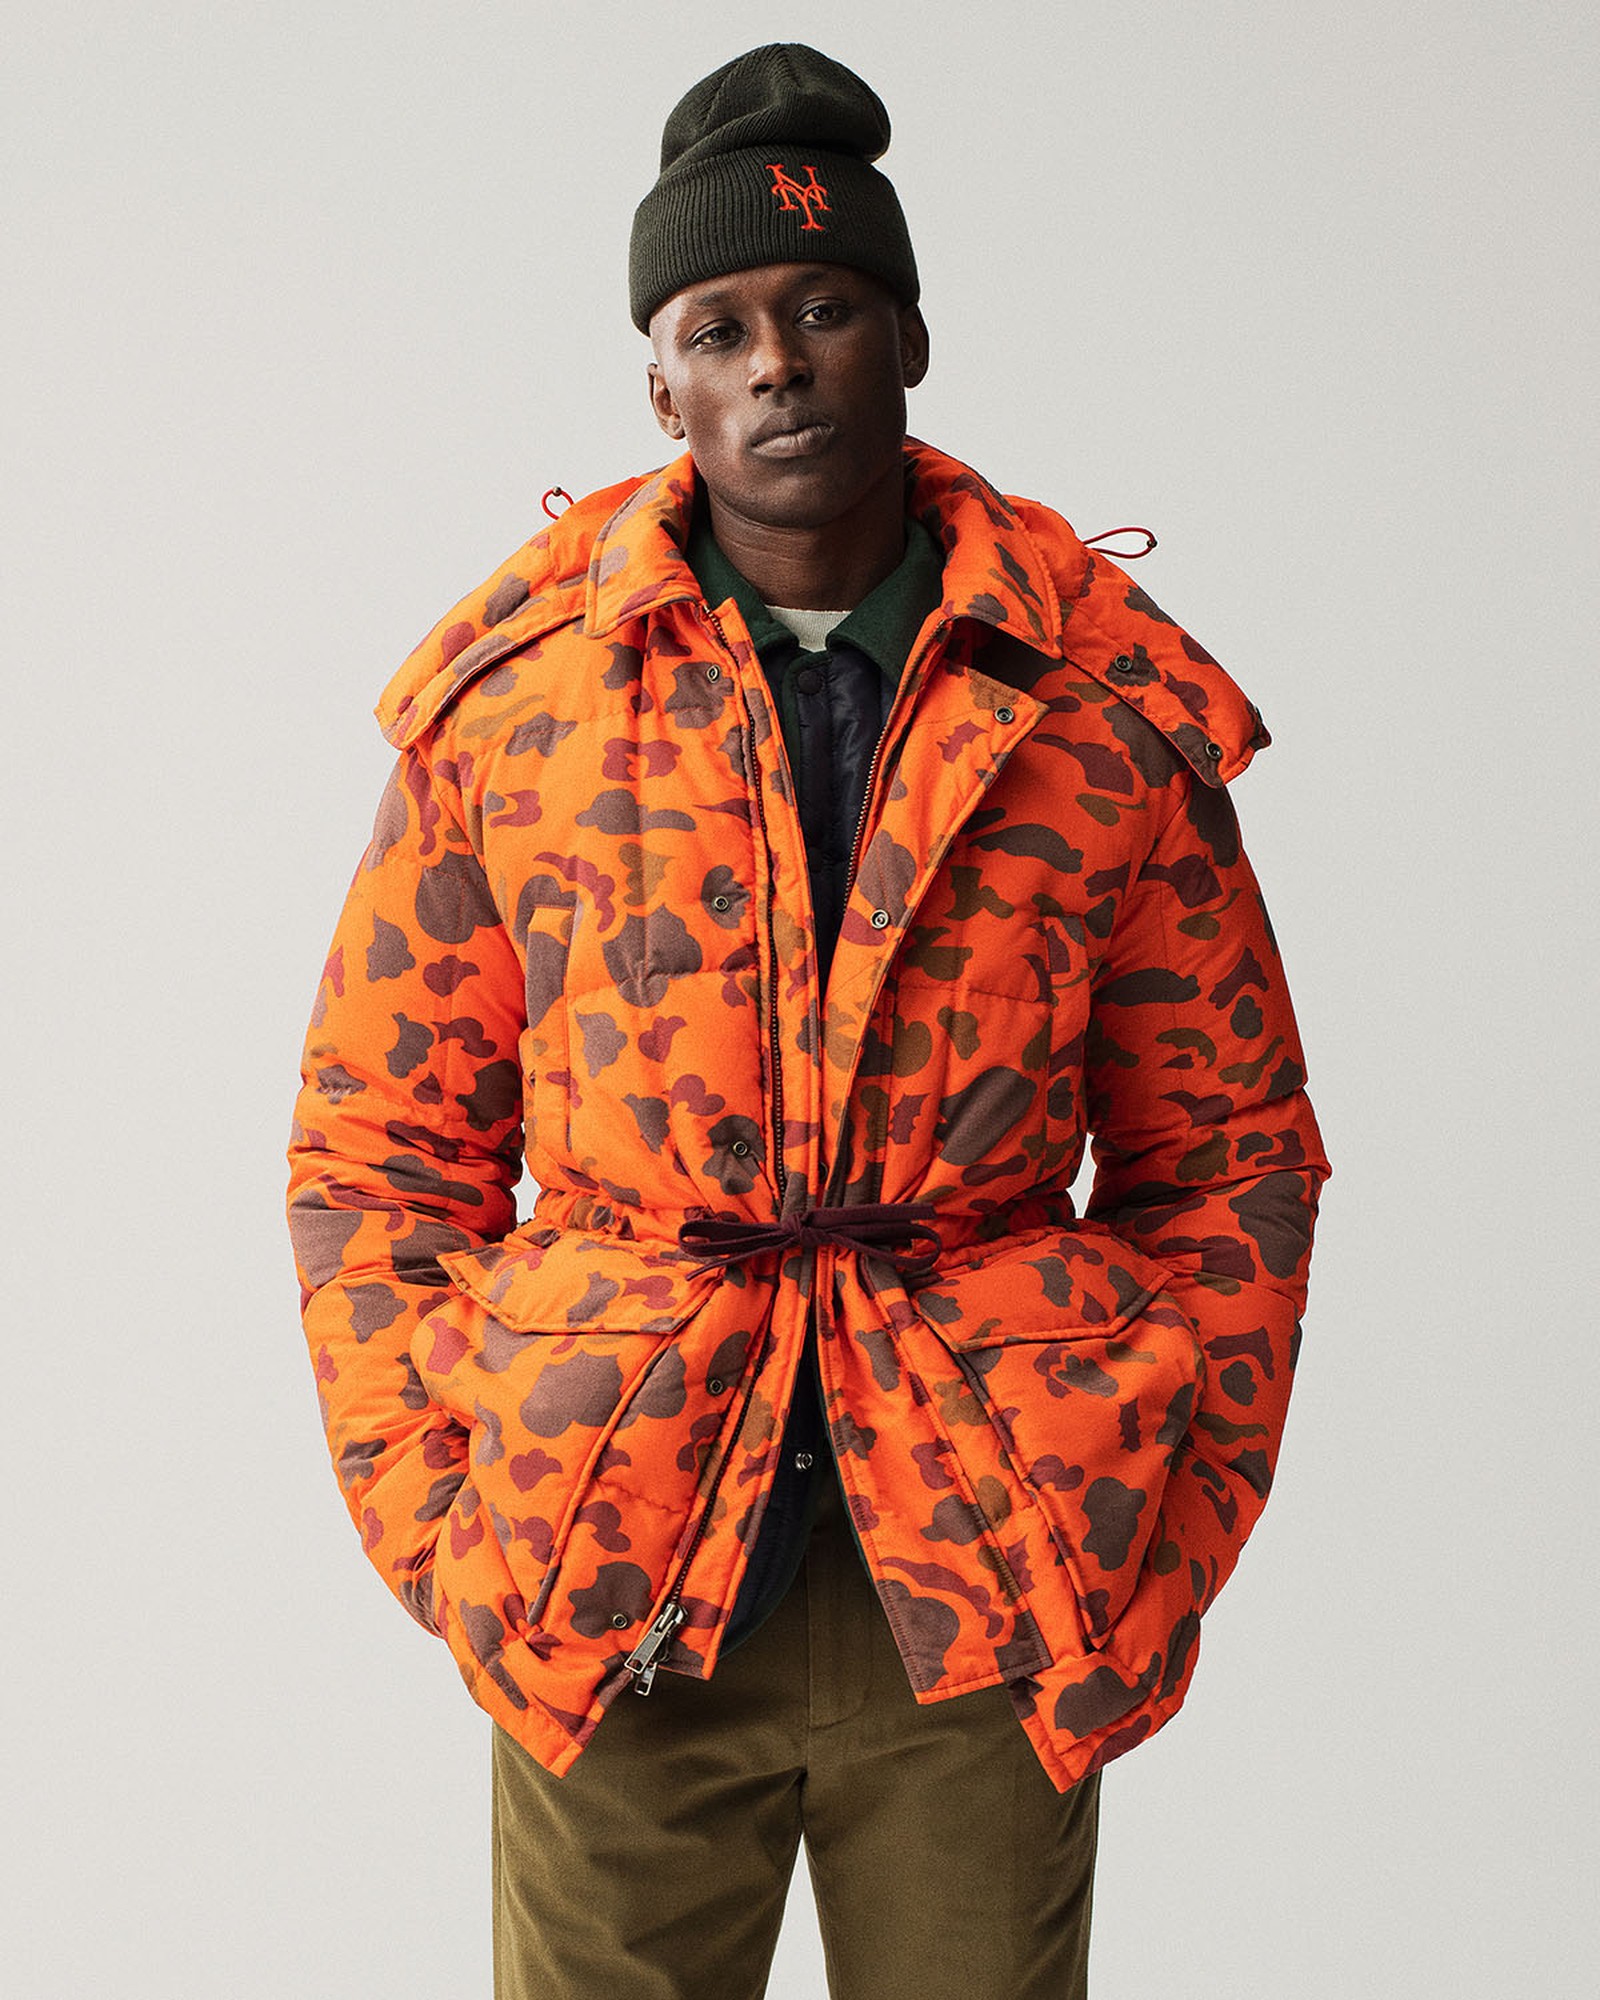 Woolrich releases second collaboration with Aime Leon Dore